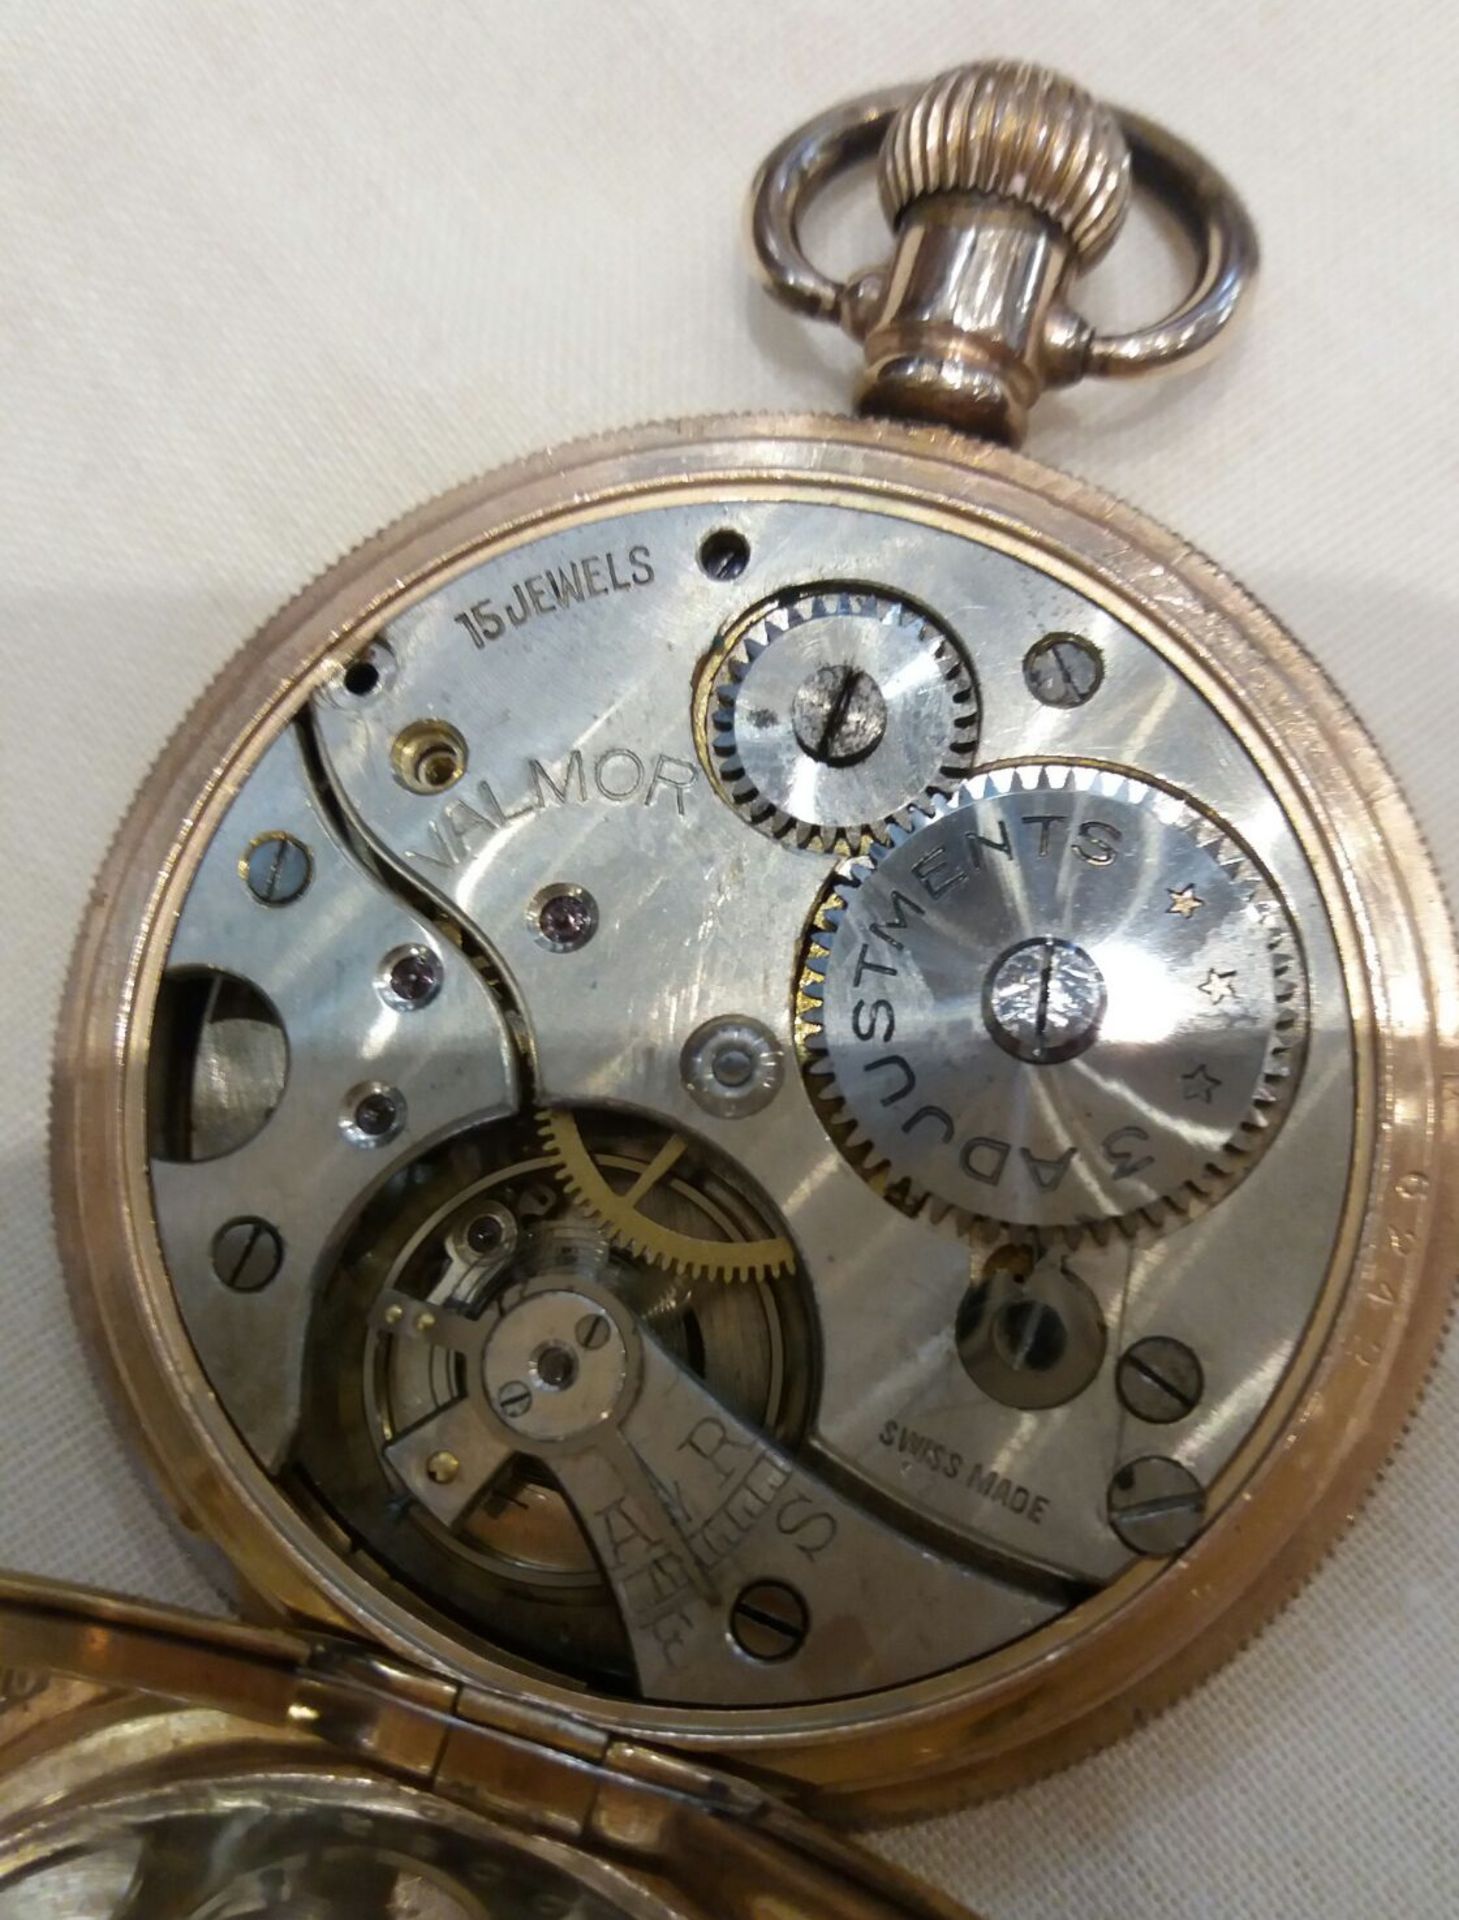 Unusual Valmor Gold Plated Pocket Watch With Hebrew Numerals - Image 2 of 3